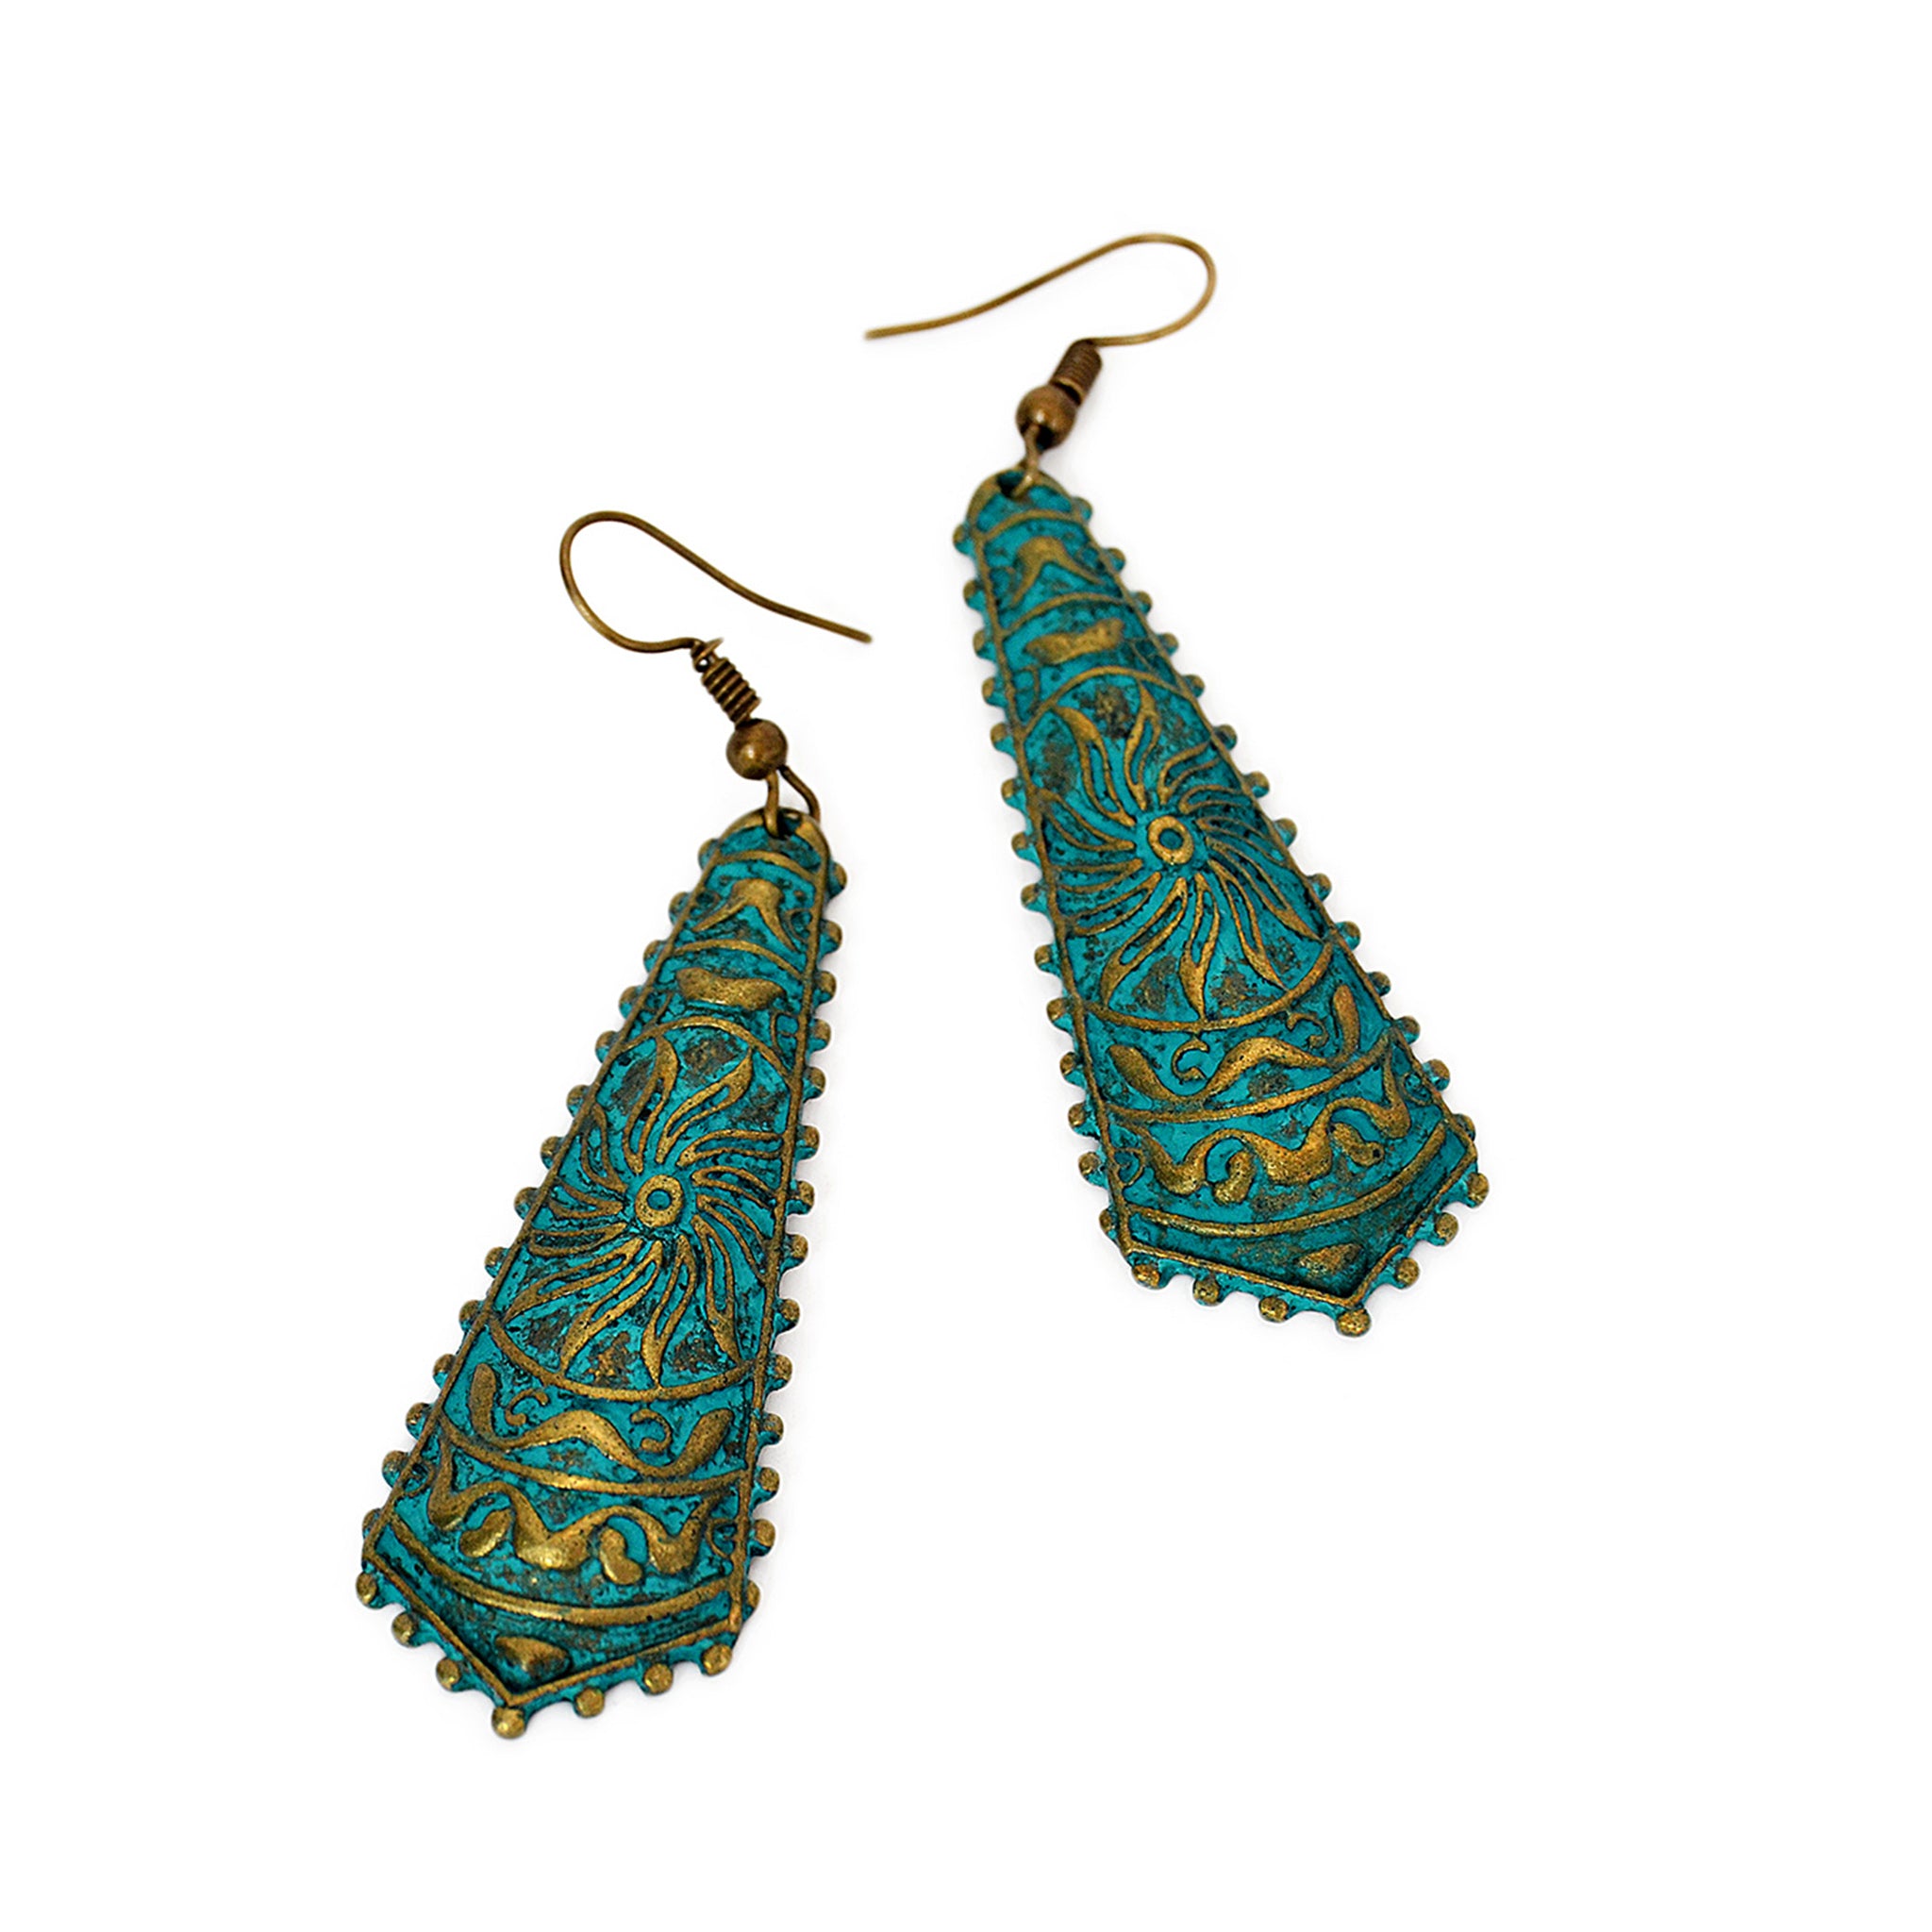 Drop earrings with engraved aztec design and blue green patina con brass